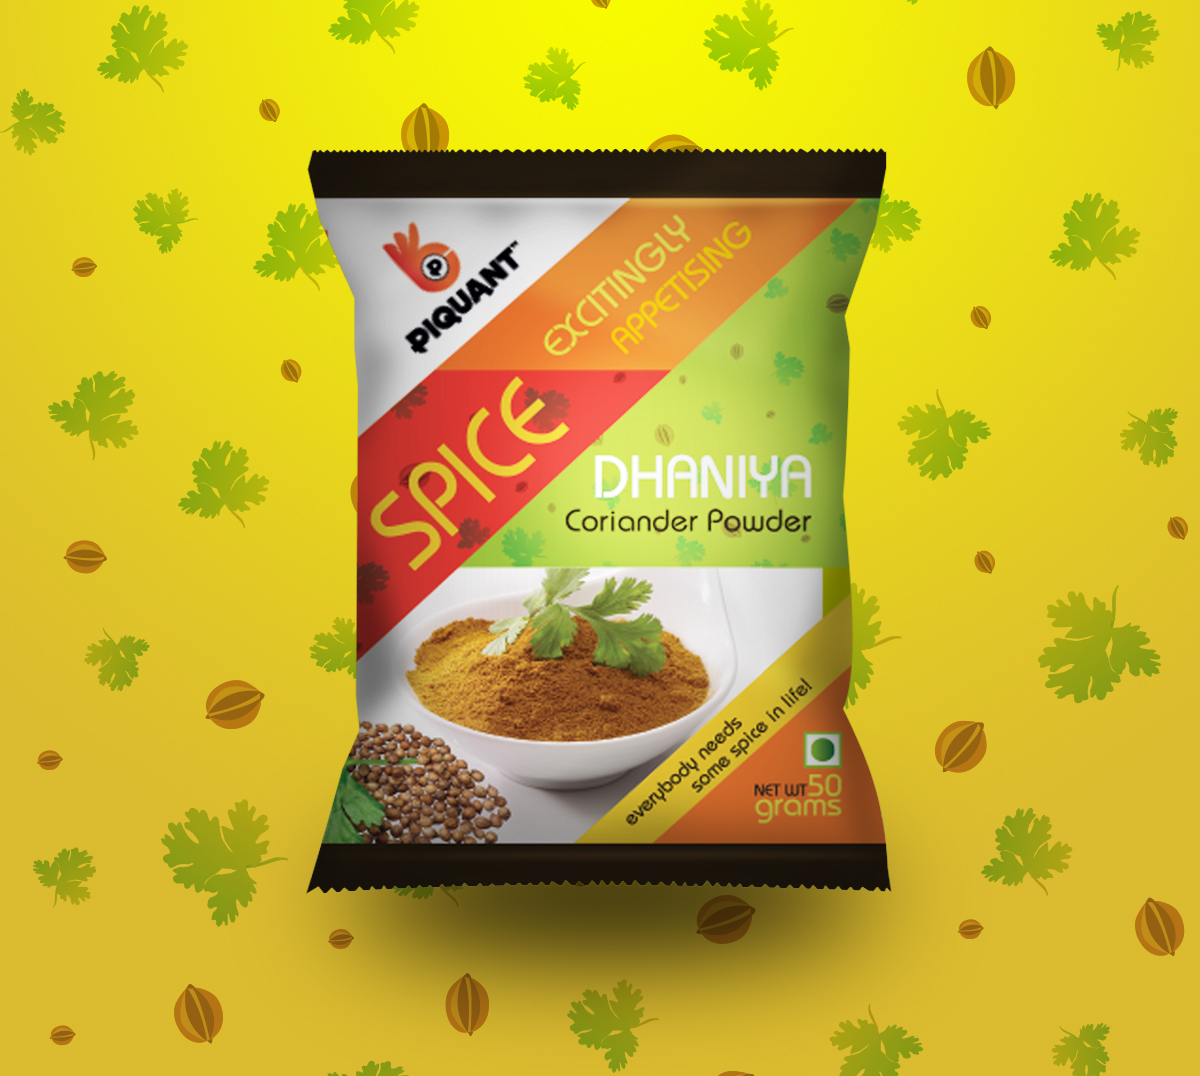 piquant packaging design moonydancer illustrations spices Food Packaging Retail spice pouches retail packaging